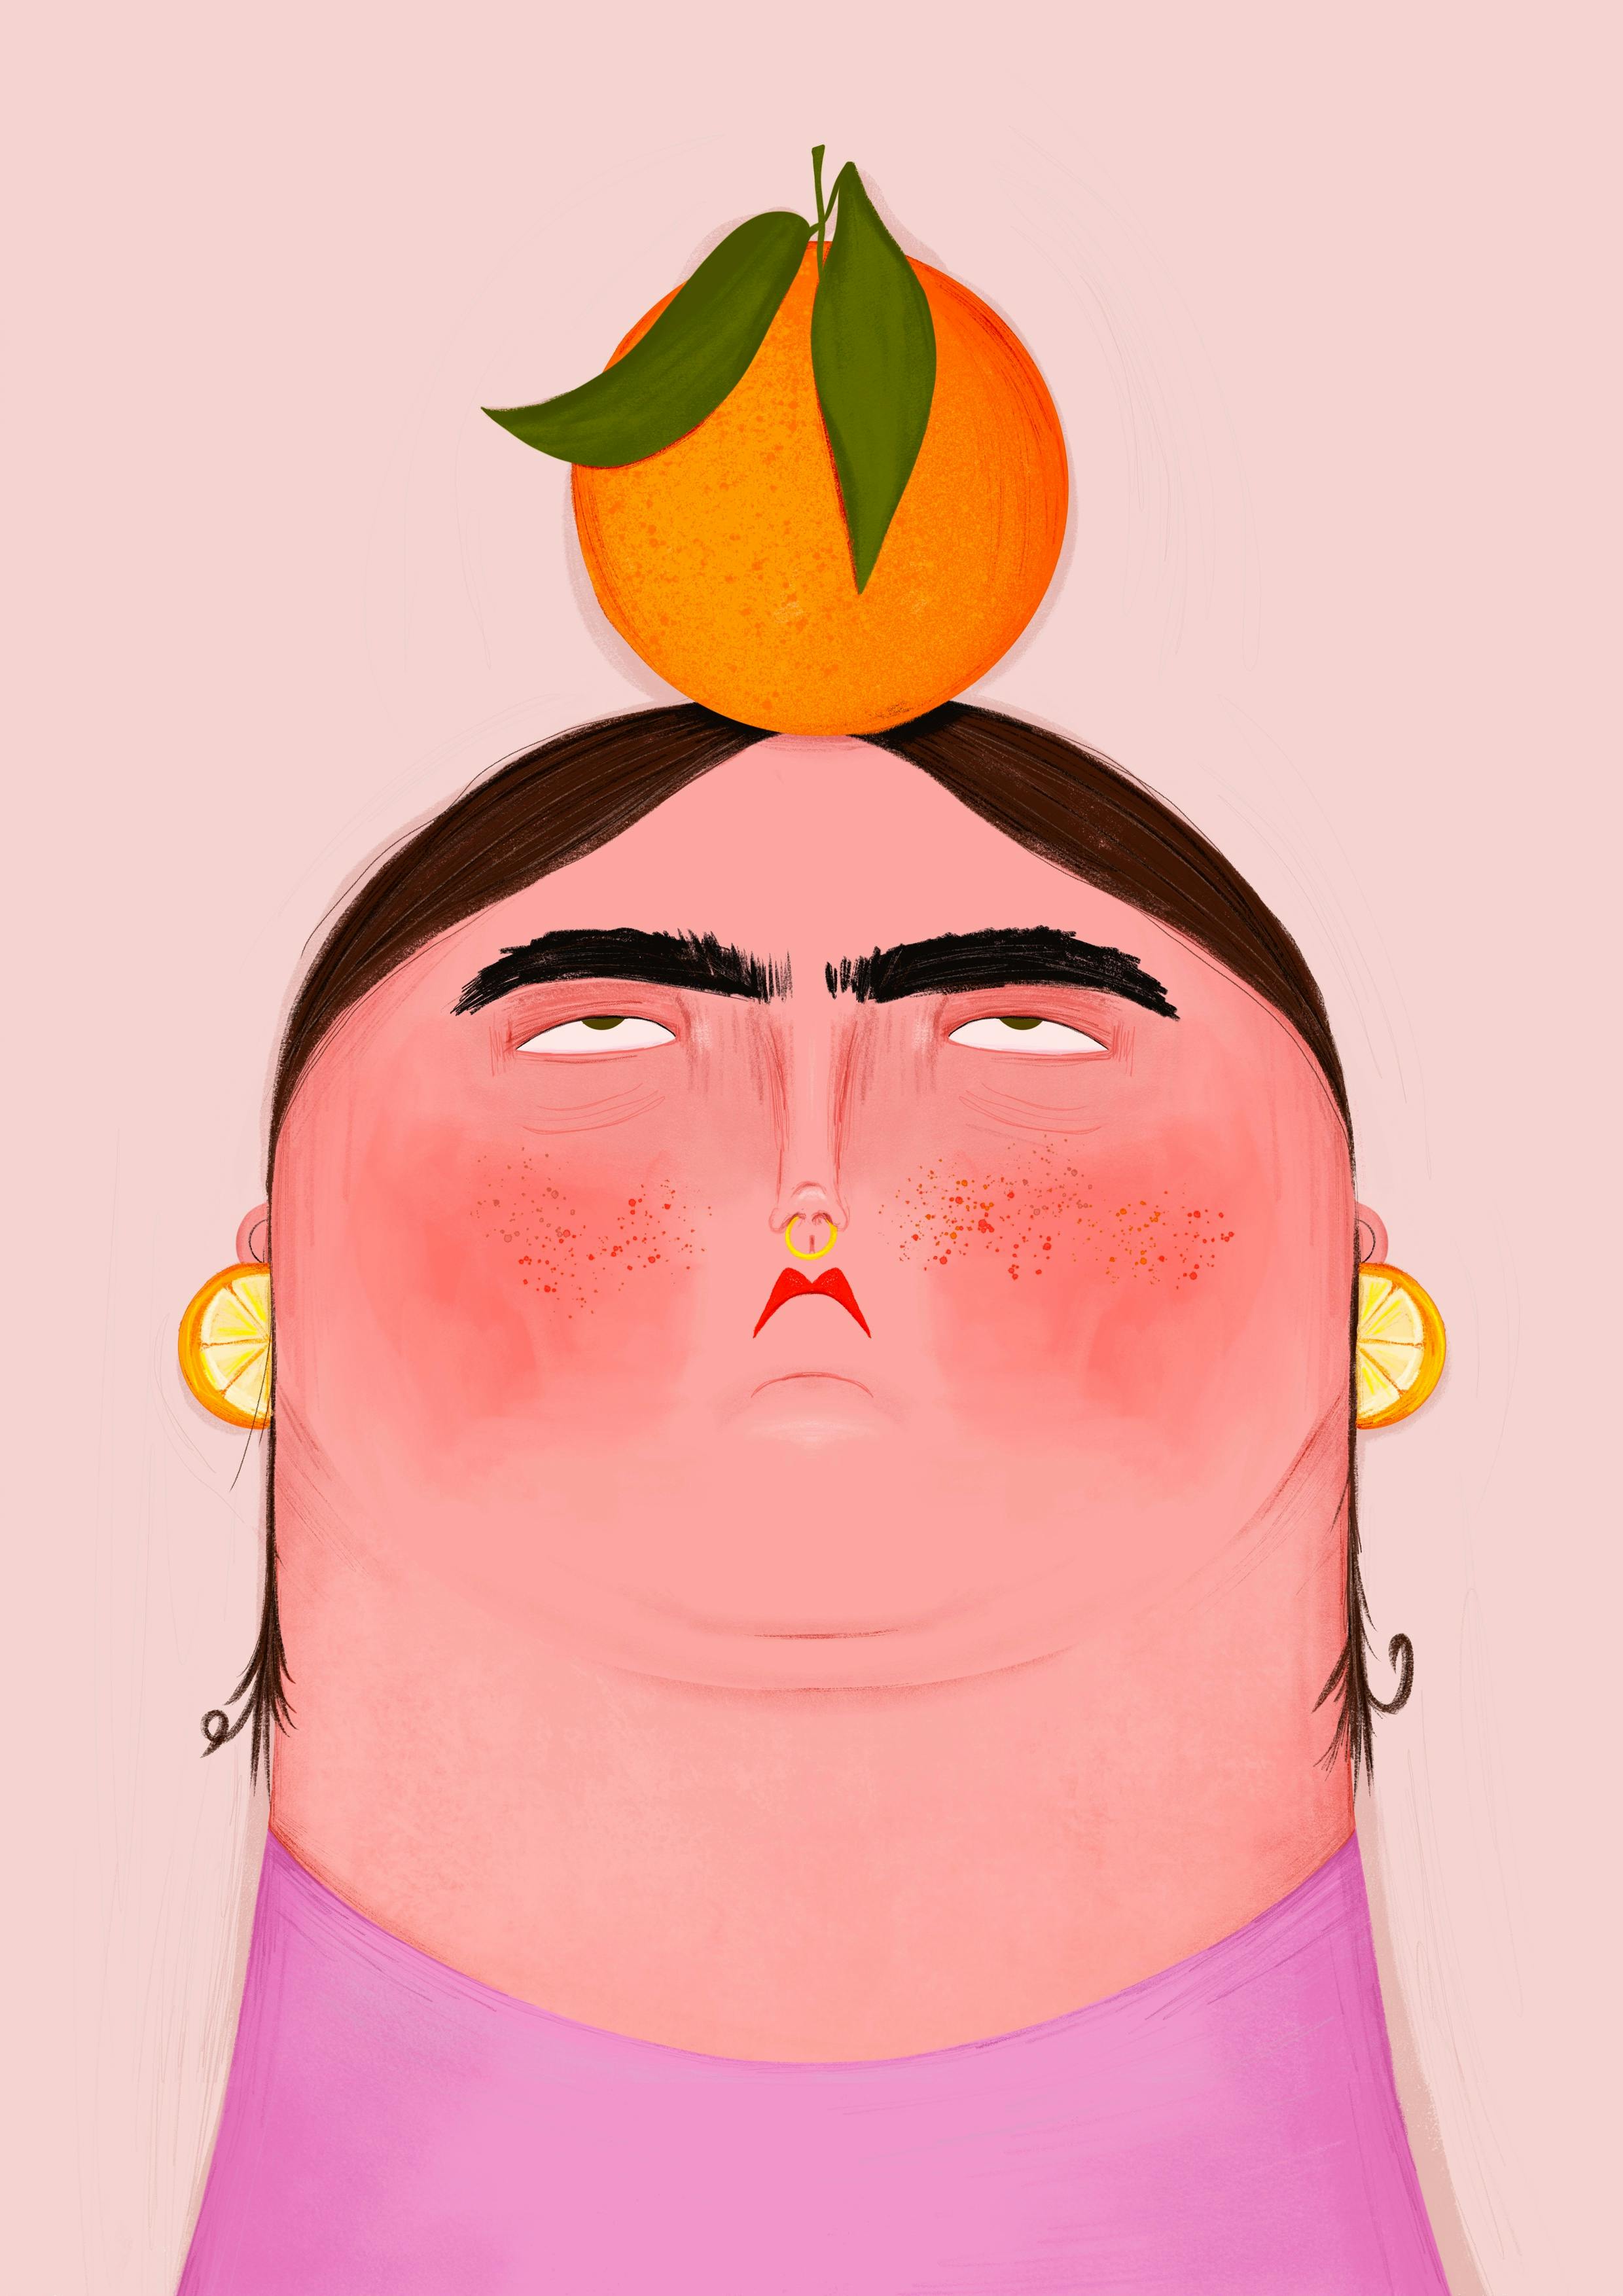 A woman with a peach on her head